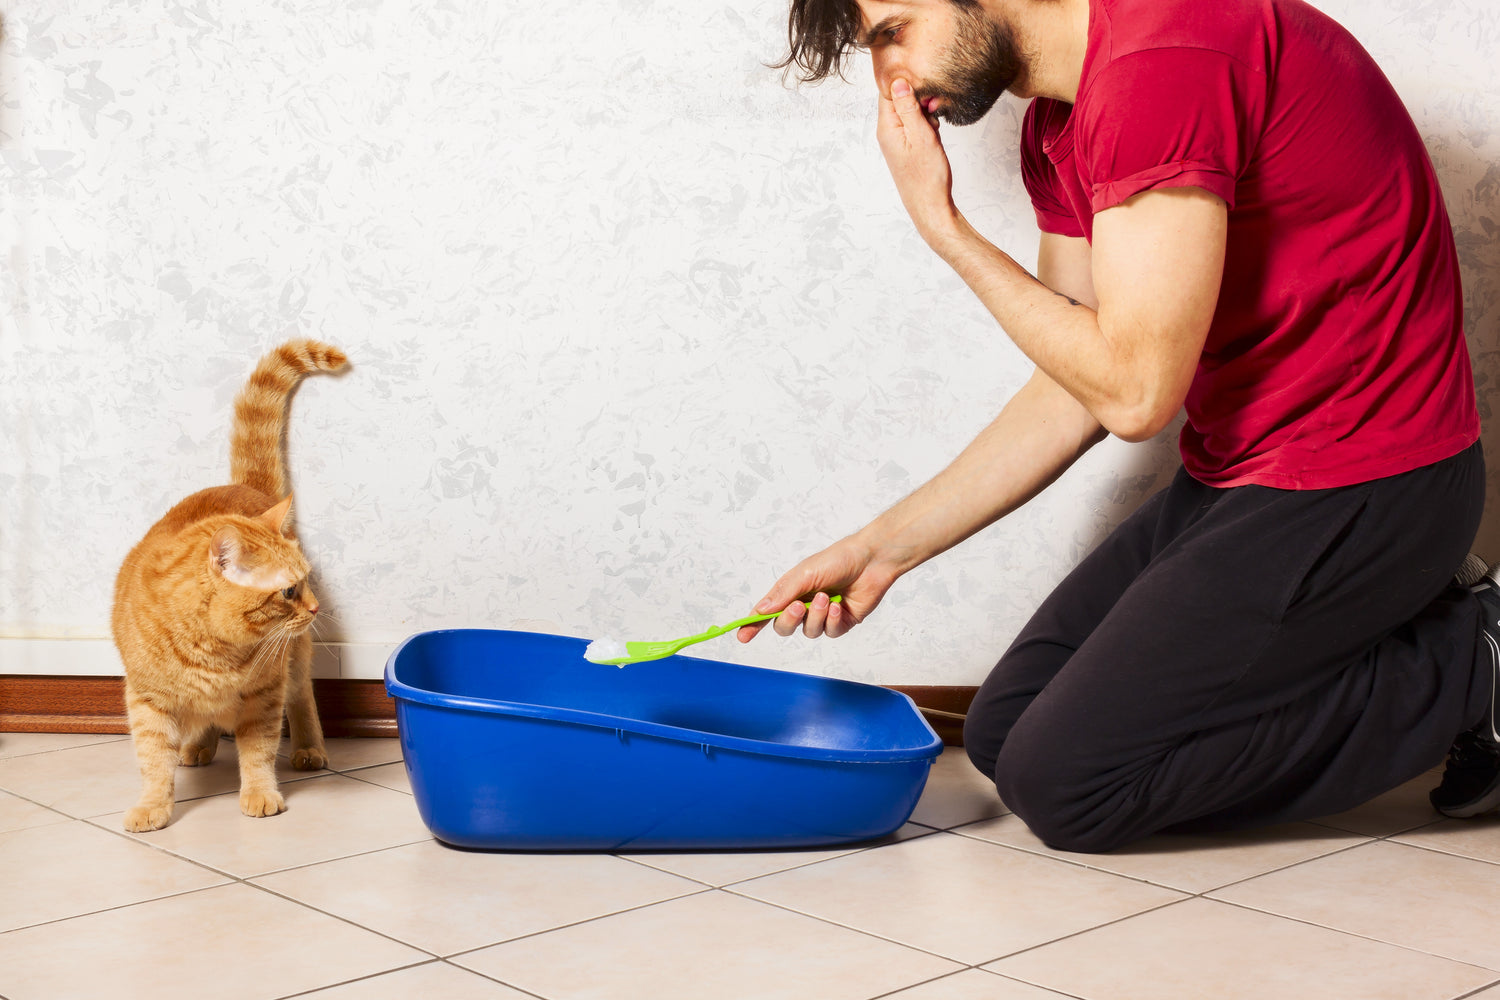 How to Clean a Litter Box